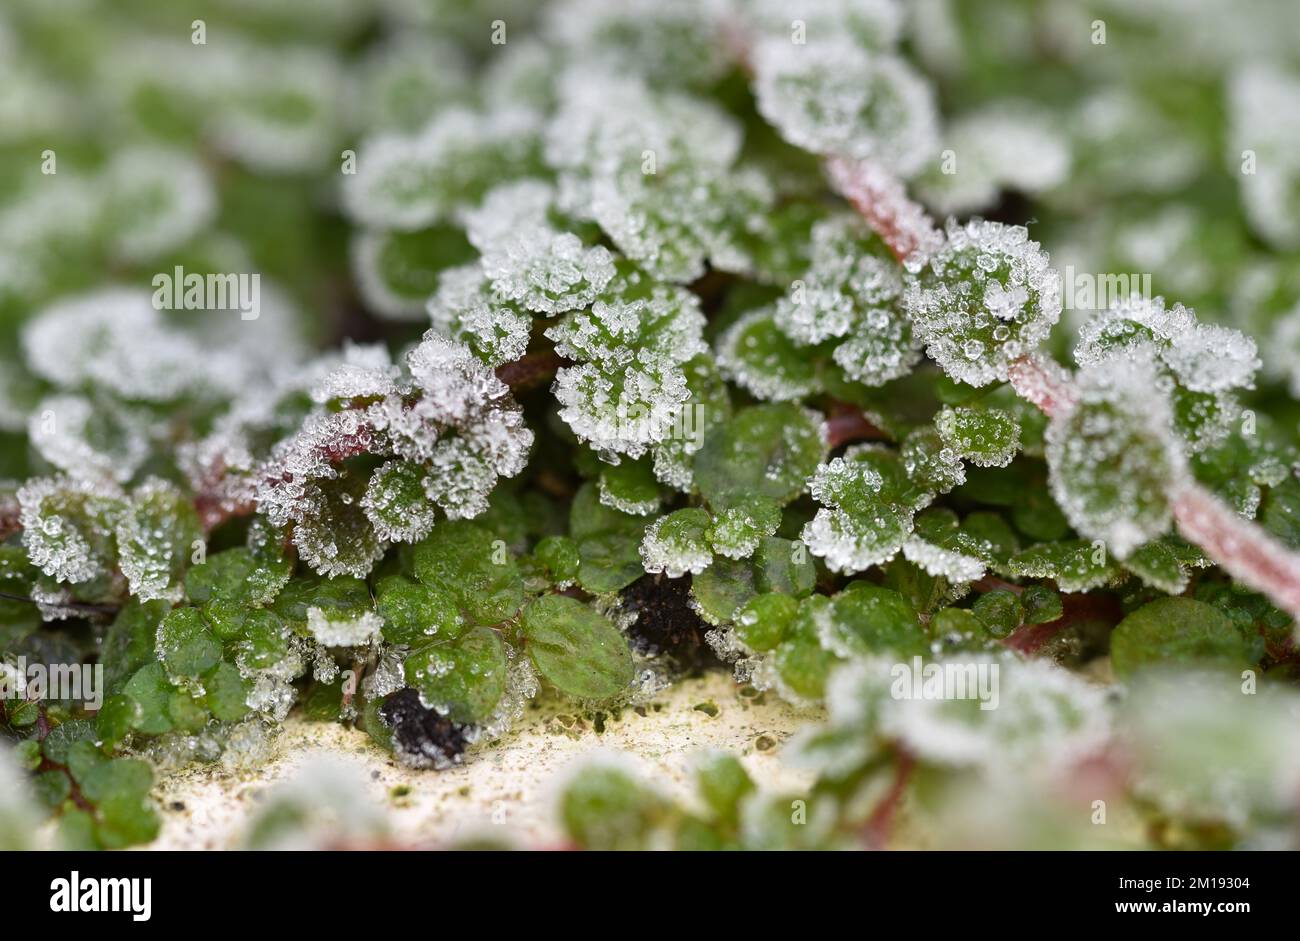 A sharp morning frost covers small leaves in an English garden during winter. Stock Photo